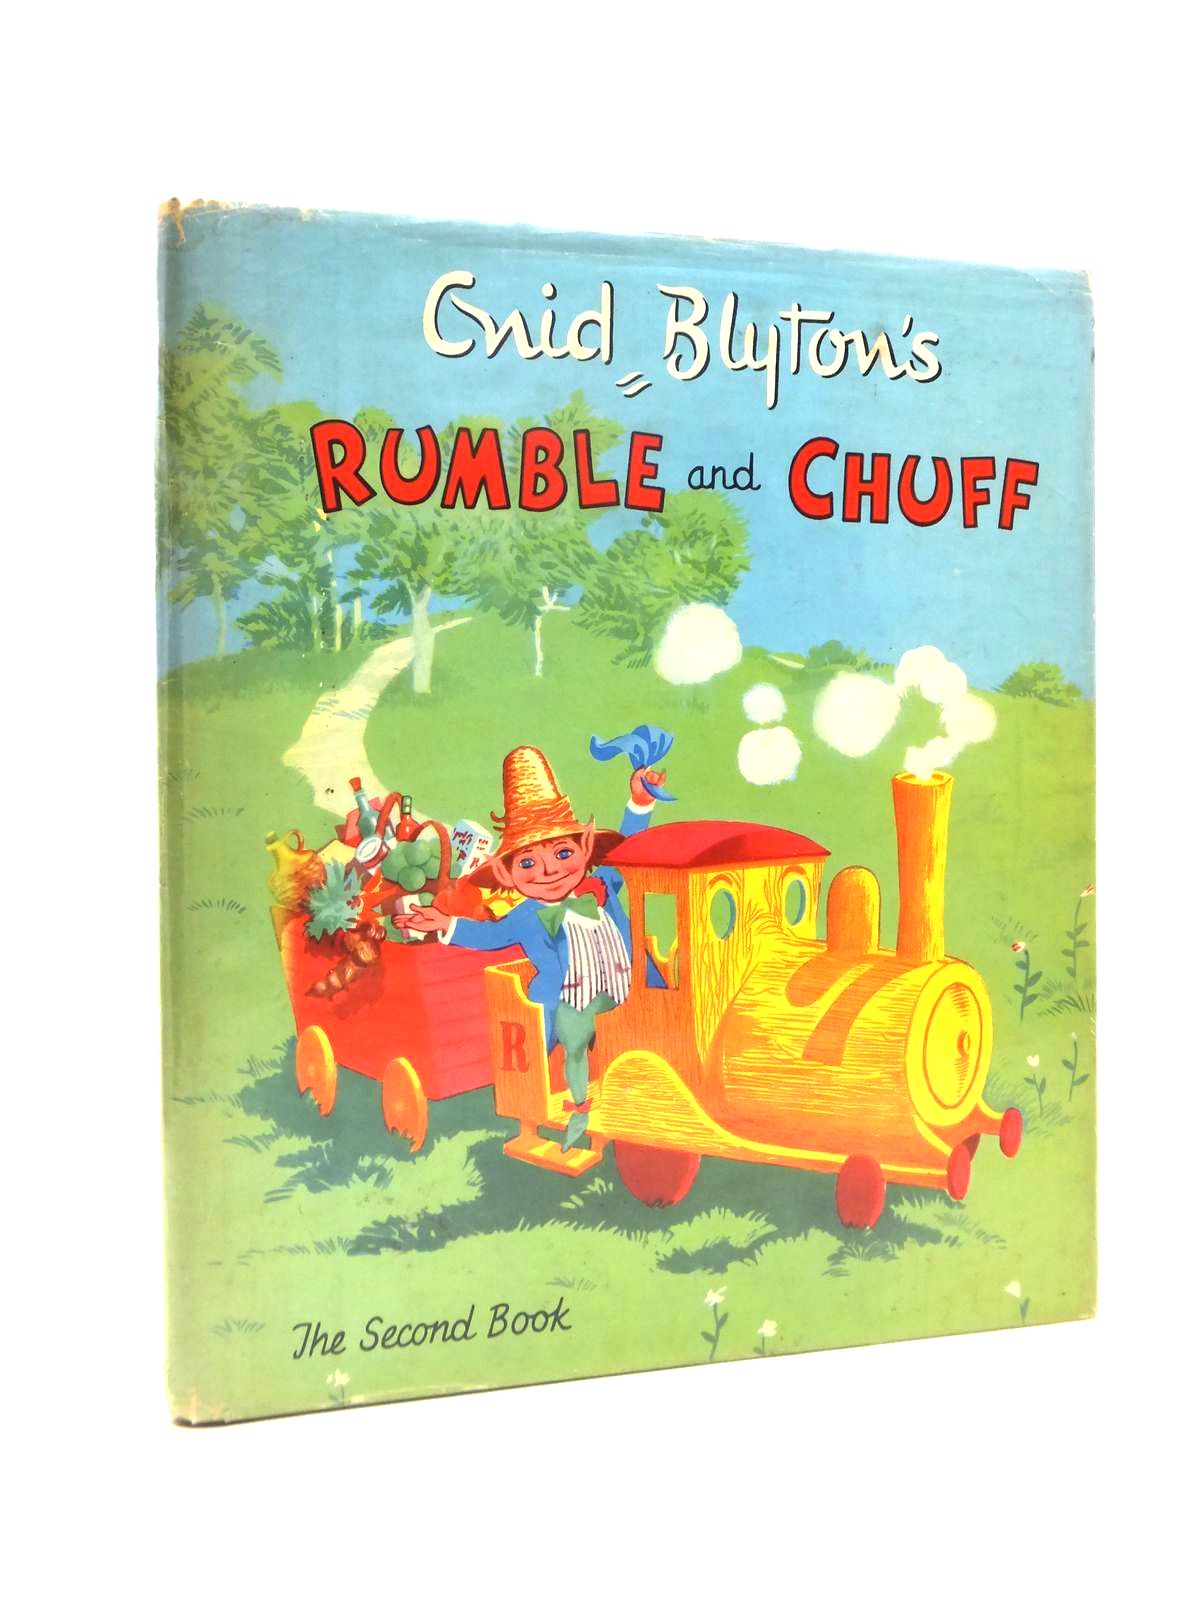 Cover of RUMBLE AND CHUFF THE SECOND BOOK by Enid Blyton